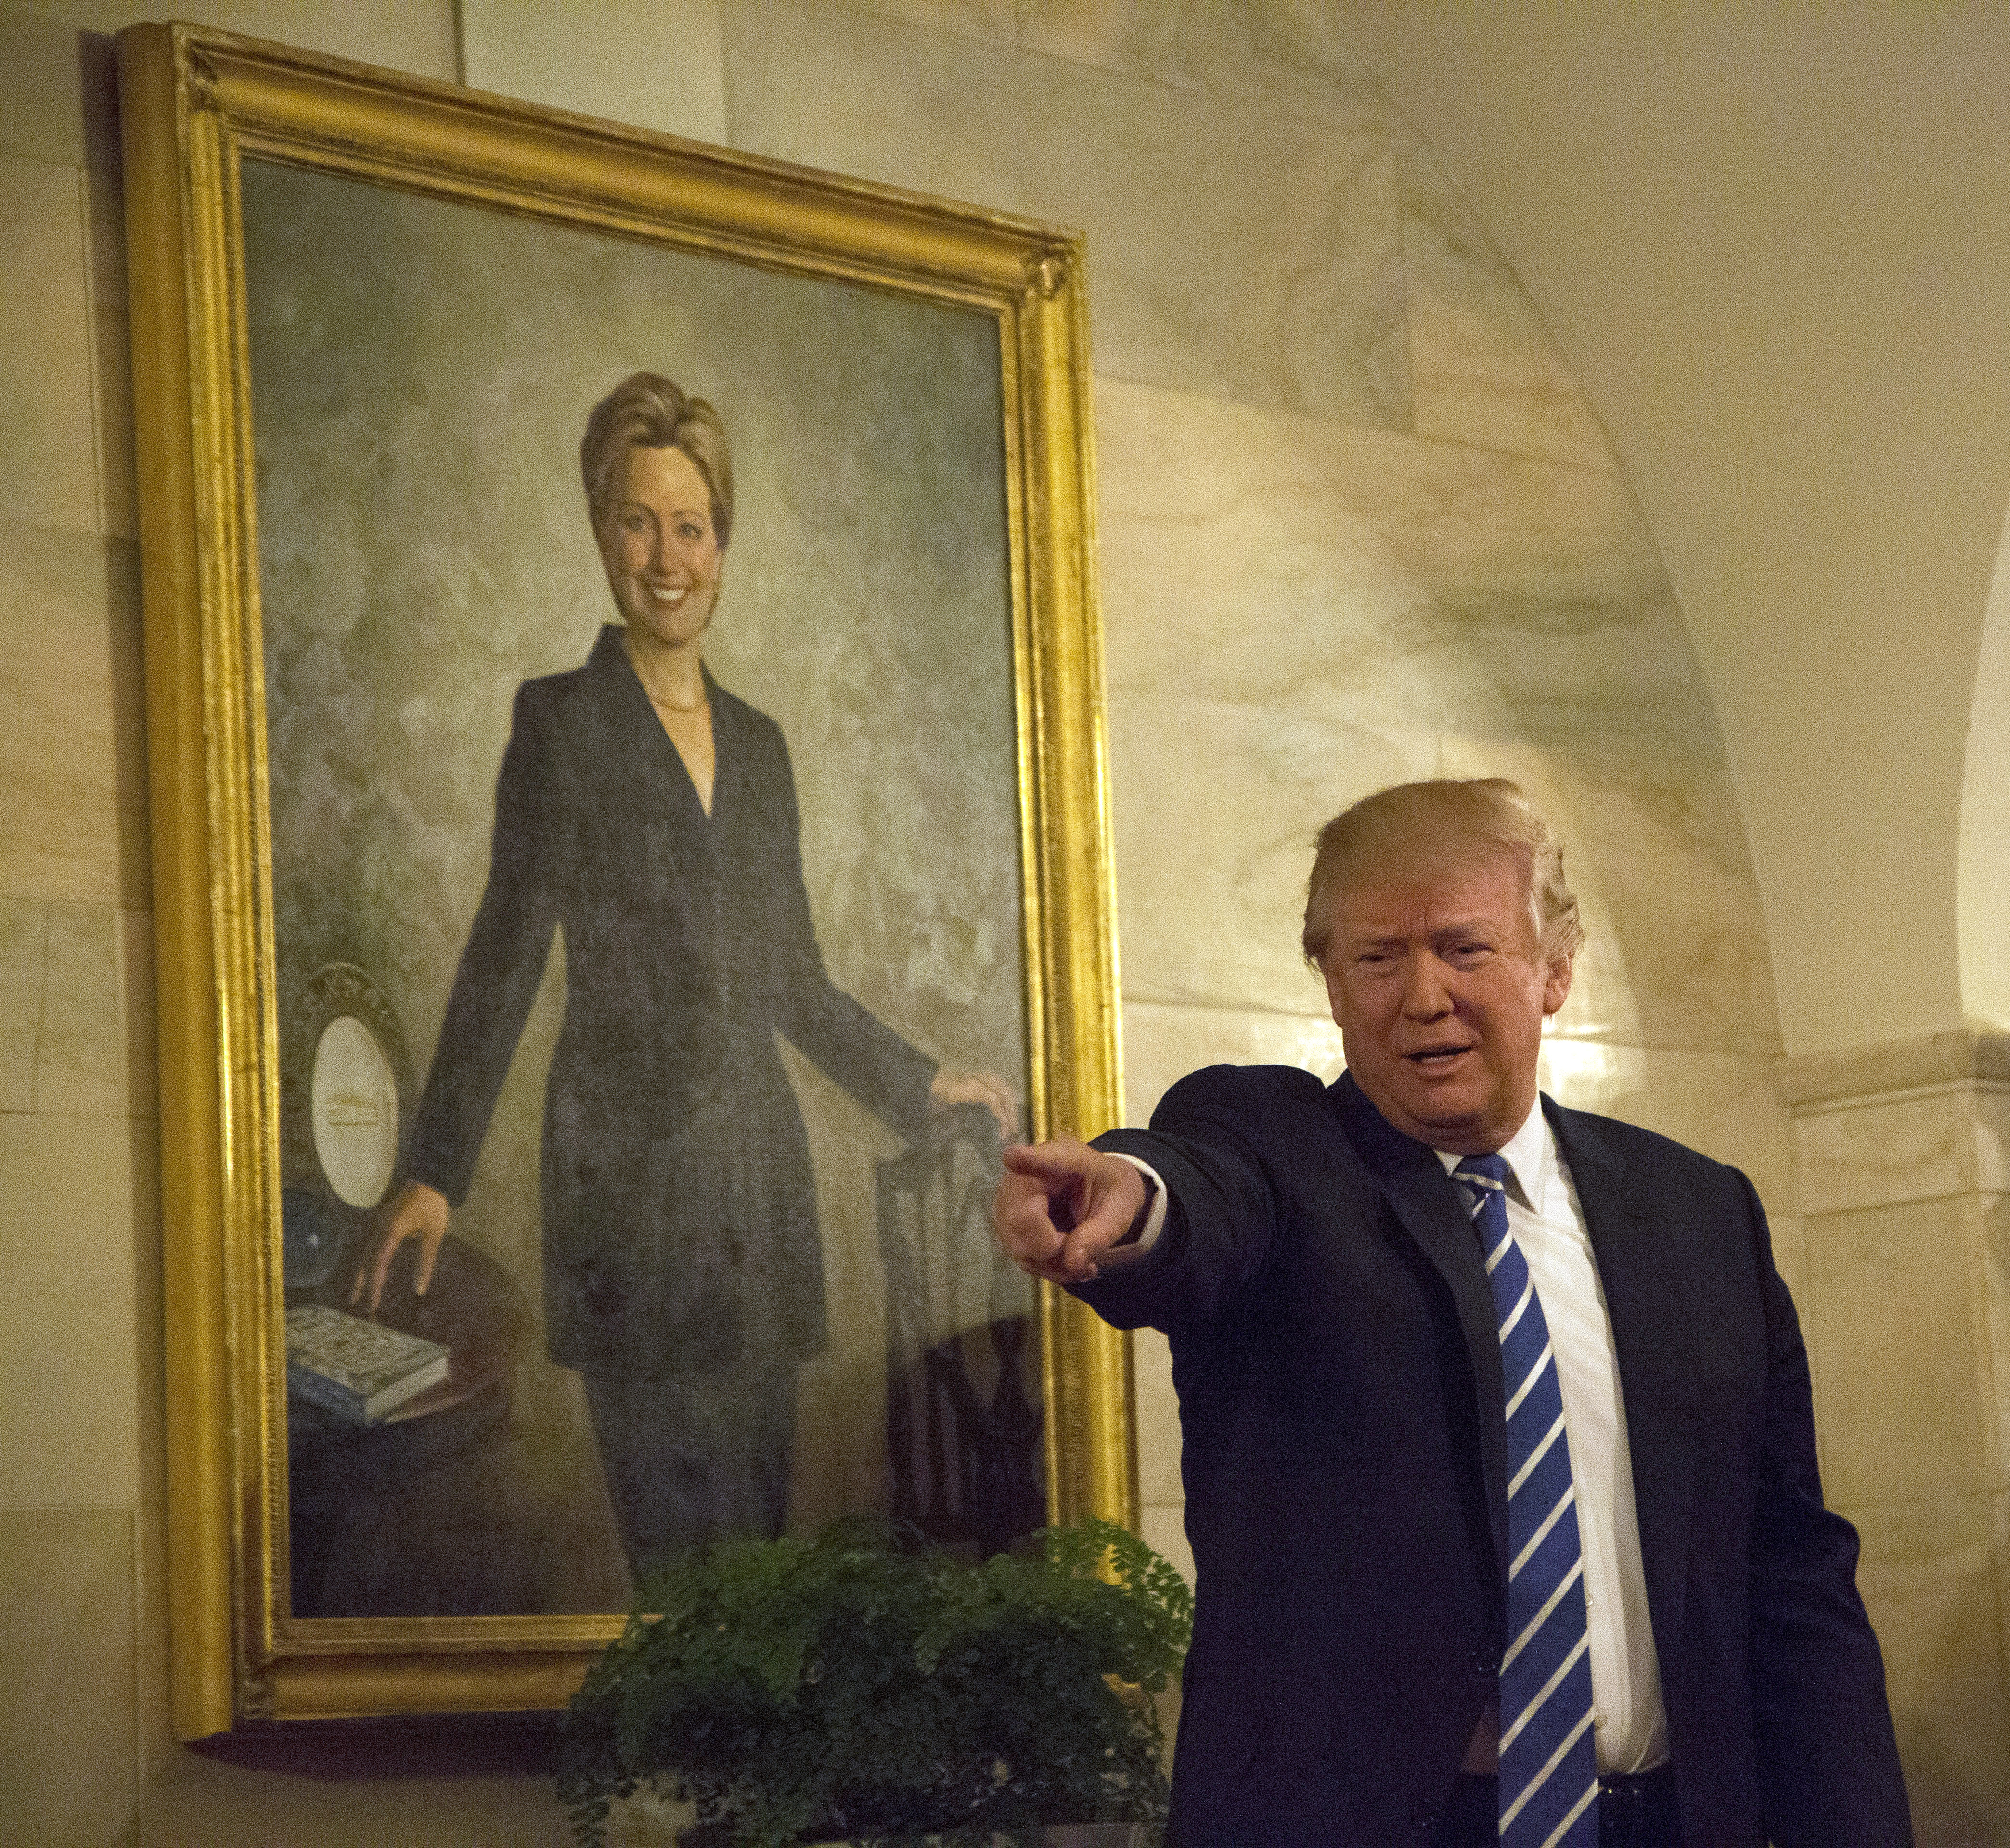 Trump stands in front of a painting of Hillary Clinton